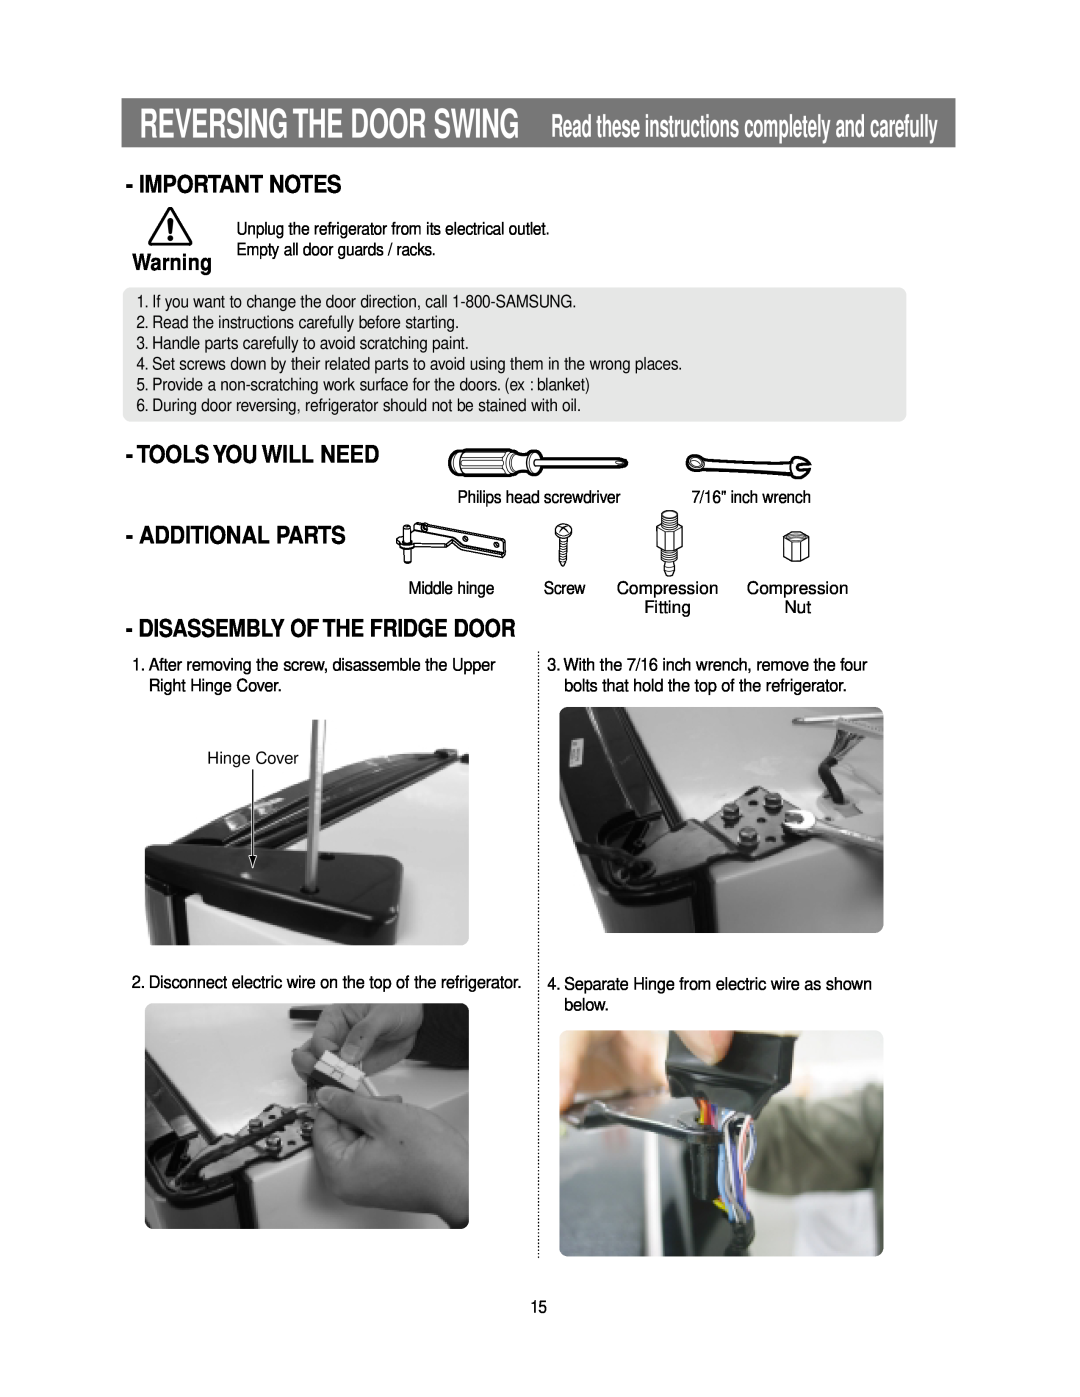 Samsung RB215LASH Important Notes, Tools You Will Need, Additional Parts, Disassembly Of The Fridge Door, Fitting 